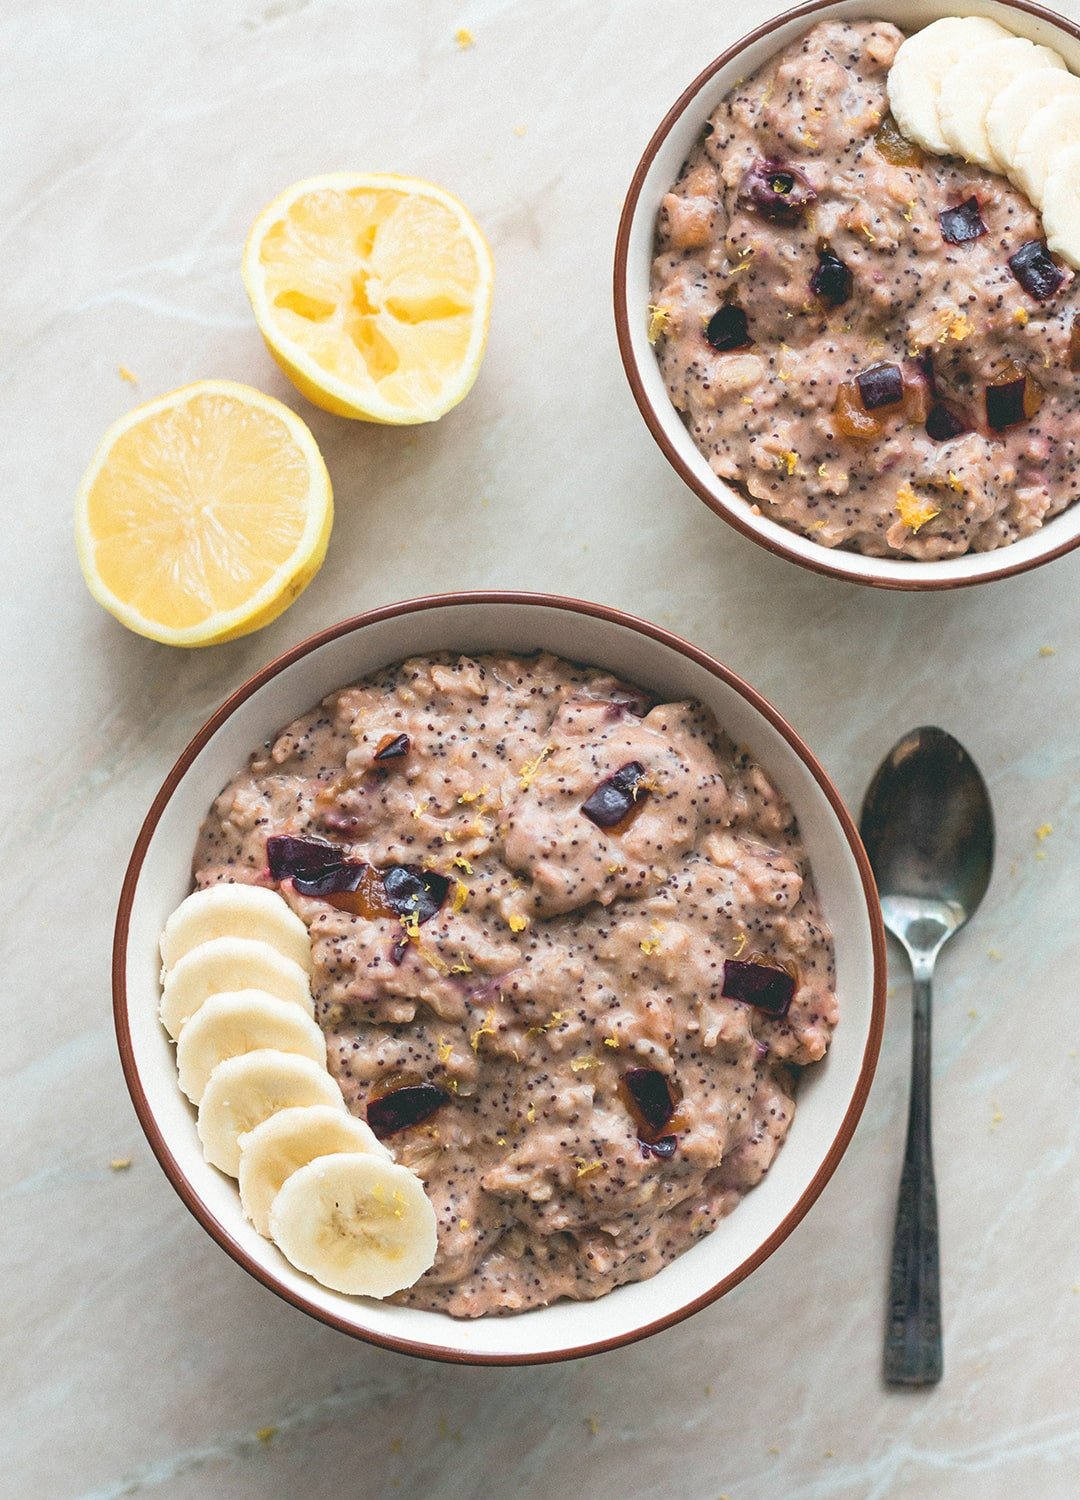 Plum Poppy Seed Oatmeal (vegan, gluten-free) - this oatmeal is really easy to make and it's the perfect healthy breakfast to fuel you through the day! Plums, oats, almond milk, poppy seeds, and a few spices. YUM! | thehealthfulideas.com